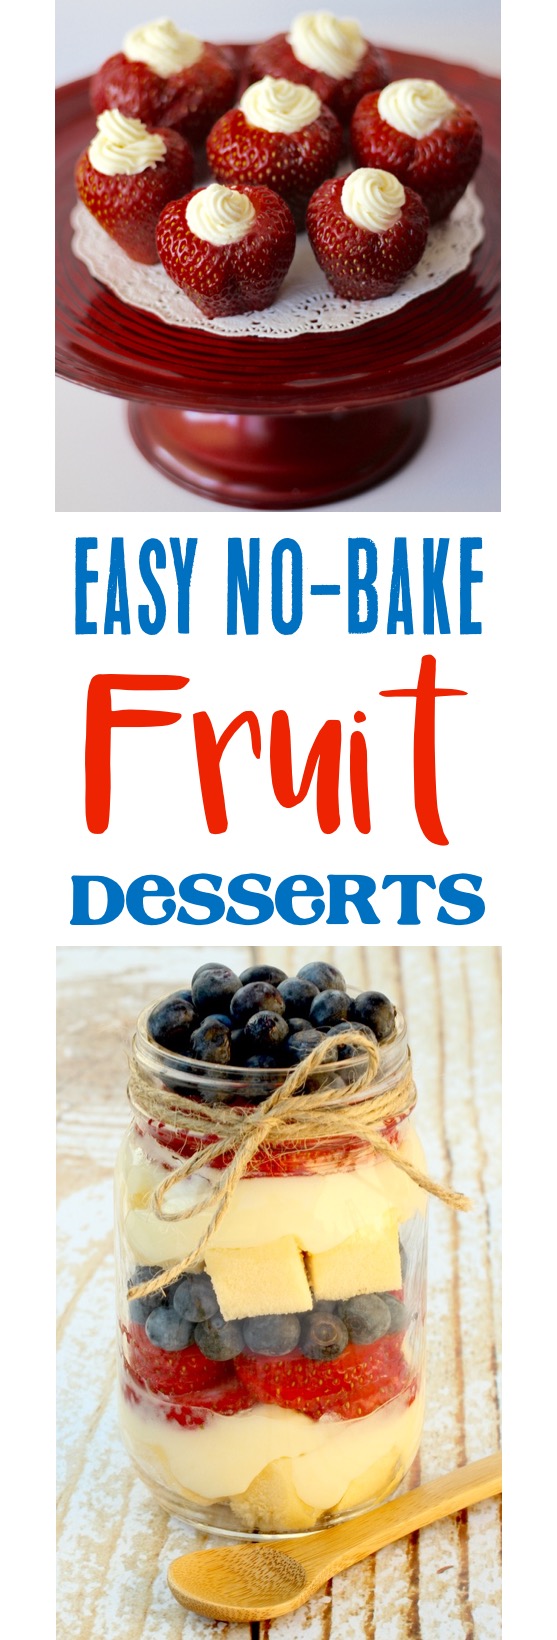 No Bake Desserts with Fruit from TheFrugalGirls.com